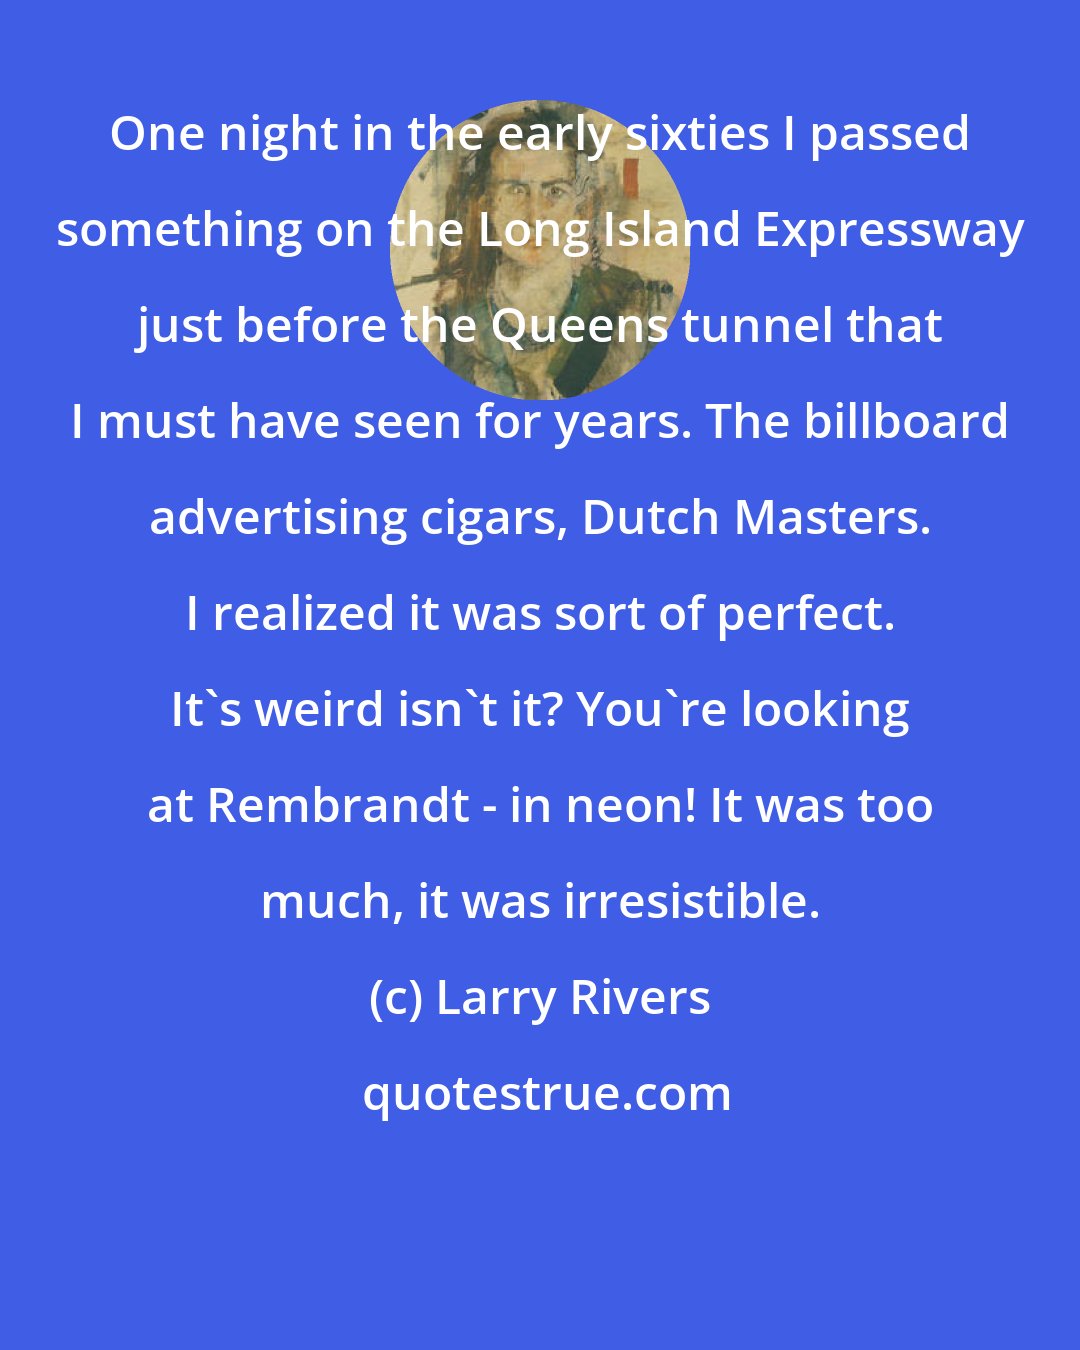 Larry Rivers: One night in the early sixties I passed something on the Long Island Expressway just before the Queens tunnel that I must have seen for years. The billboard advertising cigars, Dutch Masters. I realized it was sort of perfect. It's weird isn't it? You're looking at Rembrandt - in neon! It was too much, it was irresistible.